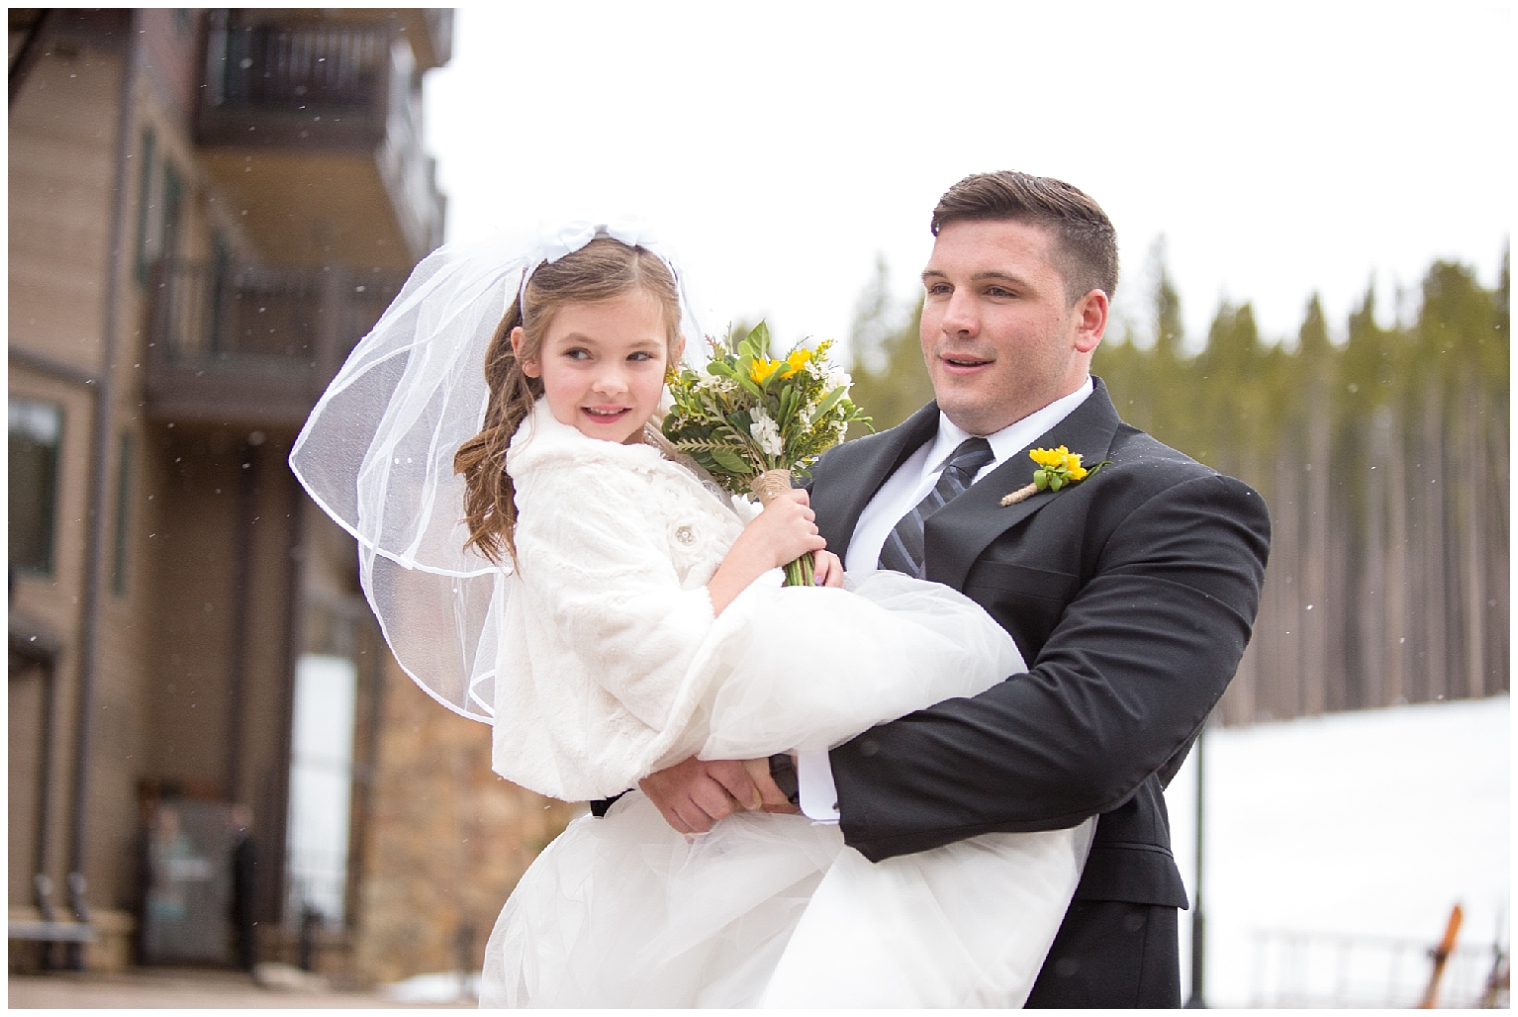 The flower girl is carried down the aisle by a groomsmen at a Breckenridge Colorado wedding.